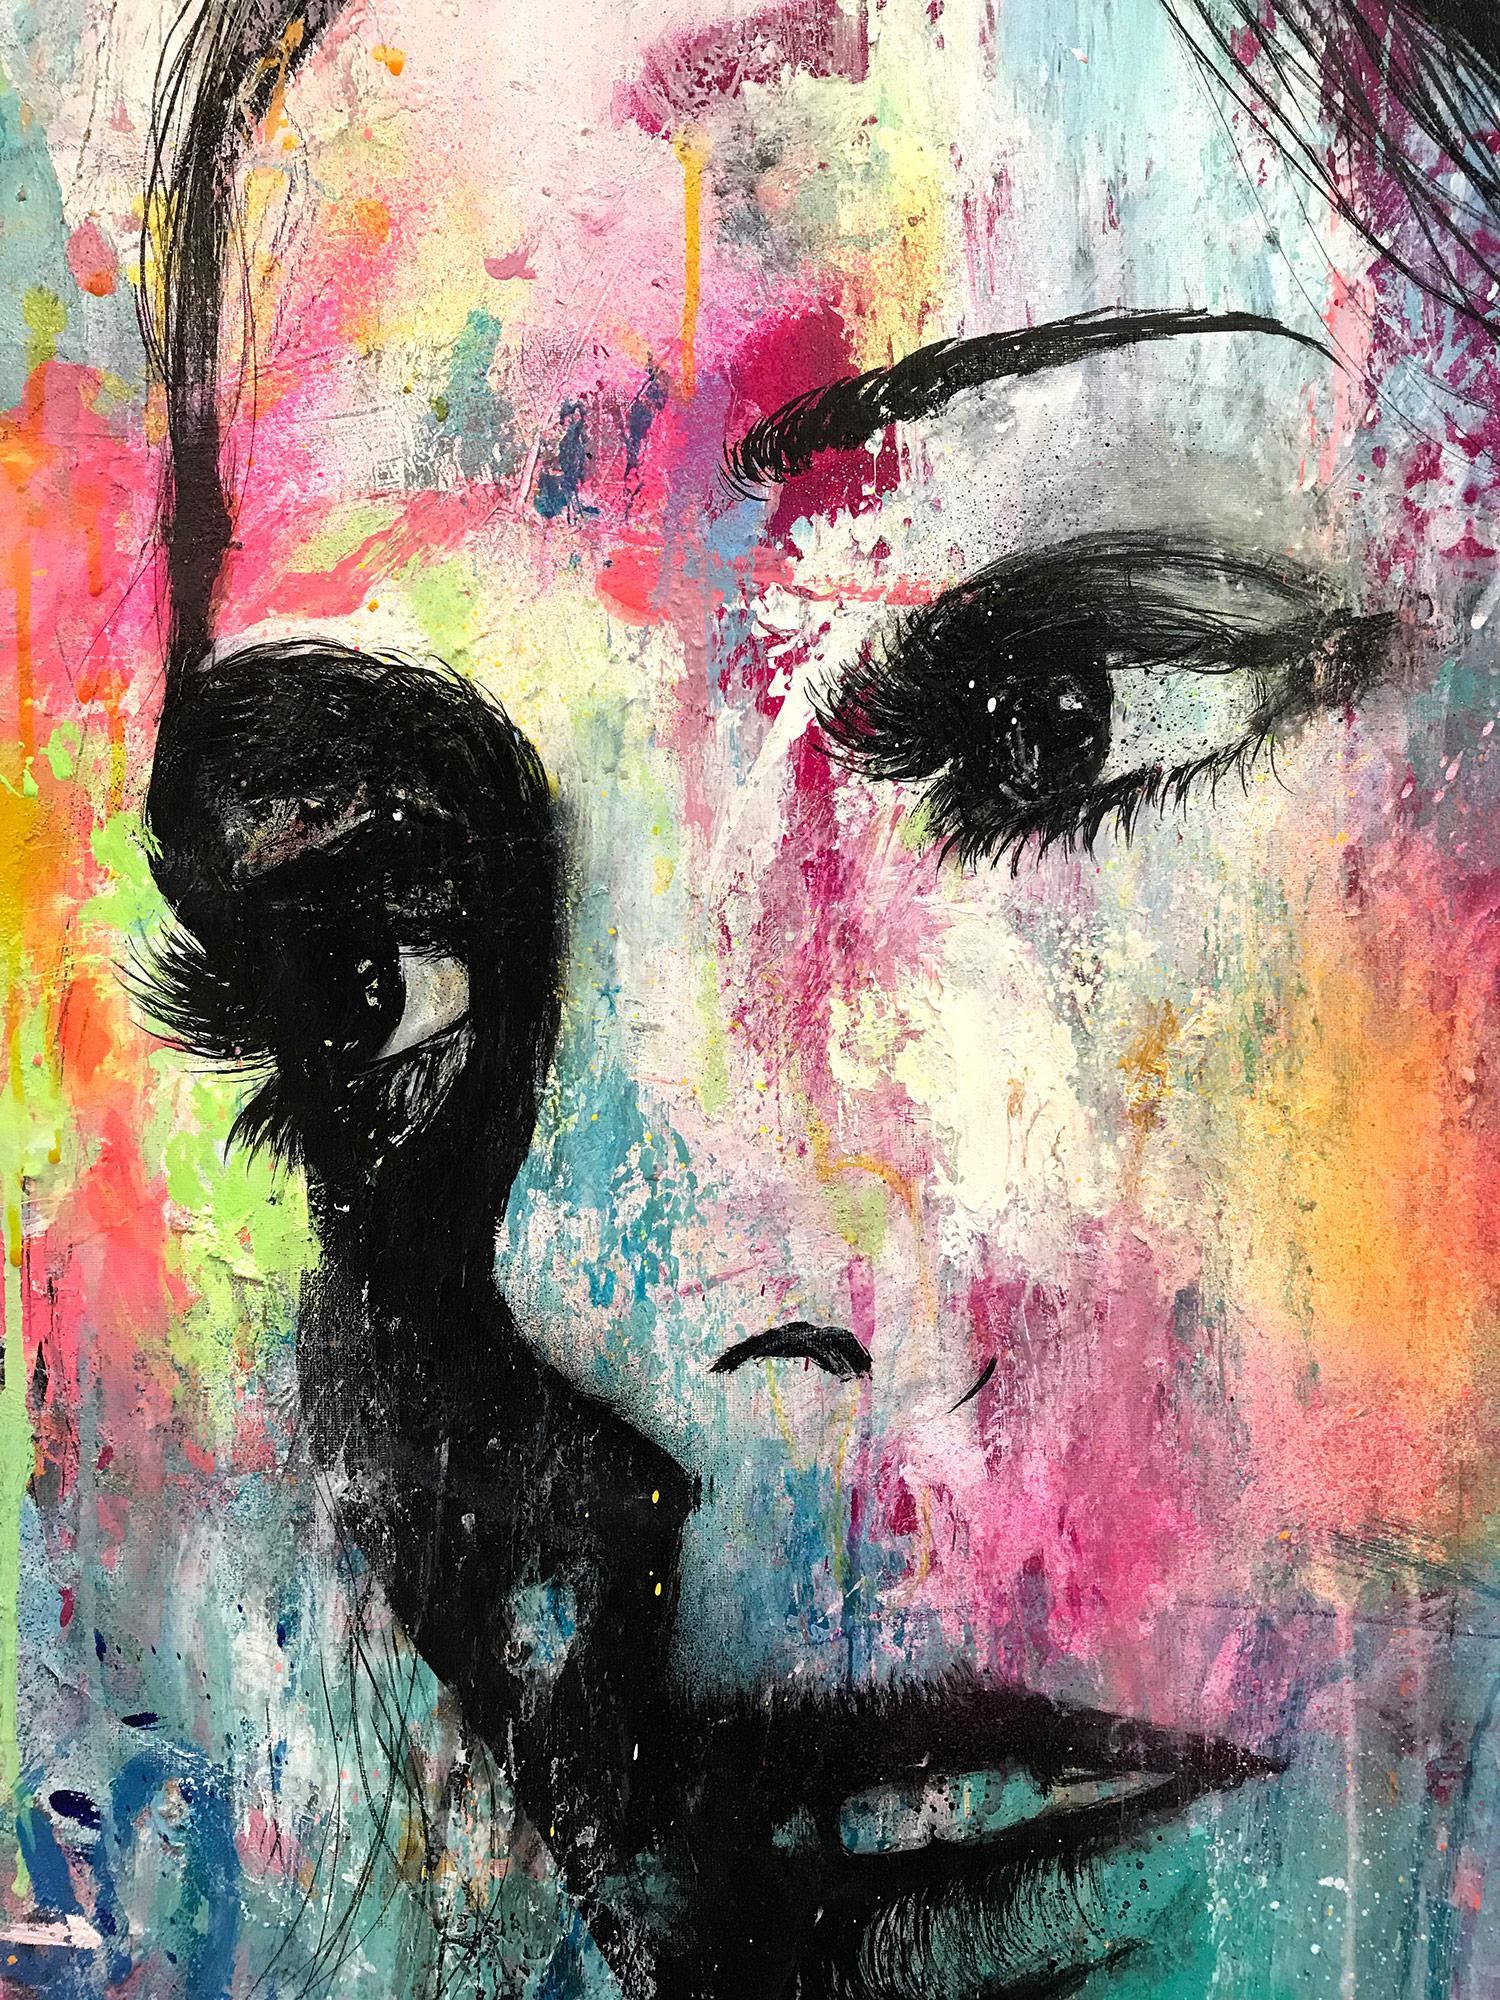 “Elle Prit son Courage” She Took her Courage, Colorful, Abstract Street Art - Painting by J.M. Robert